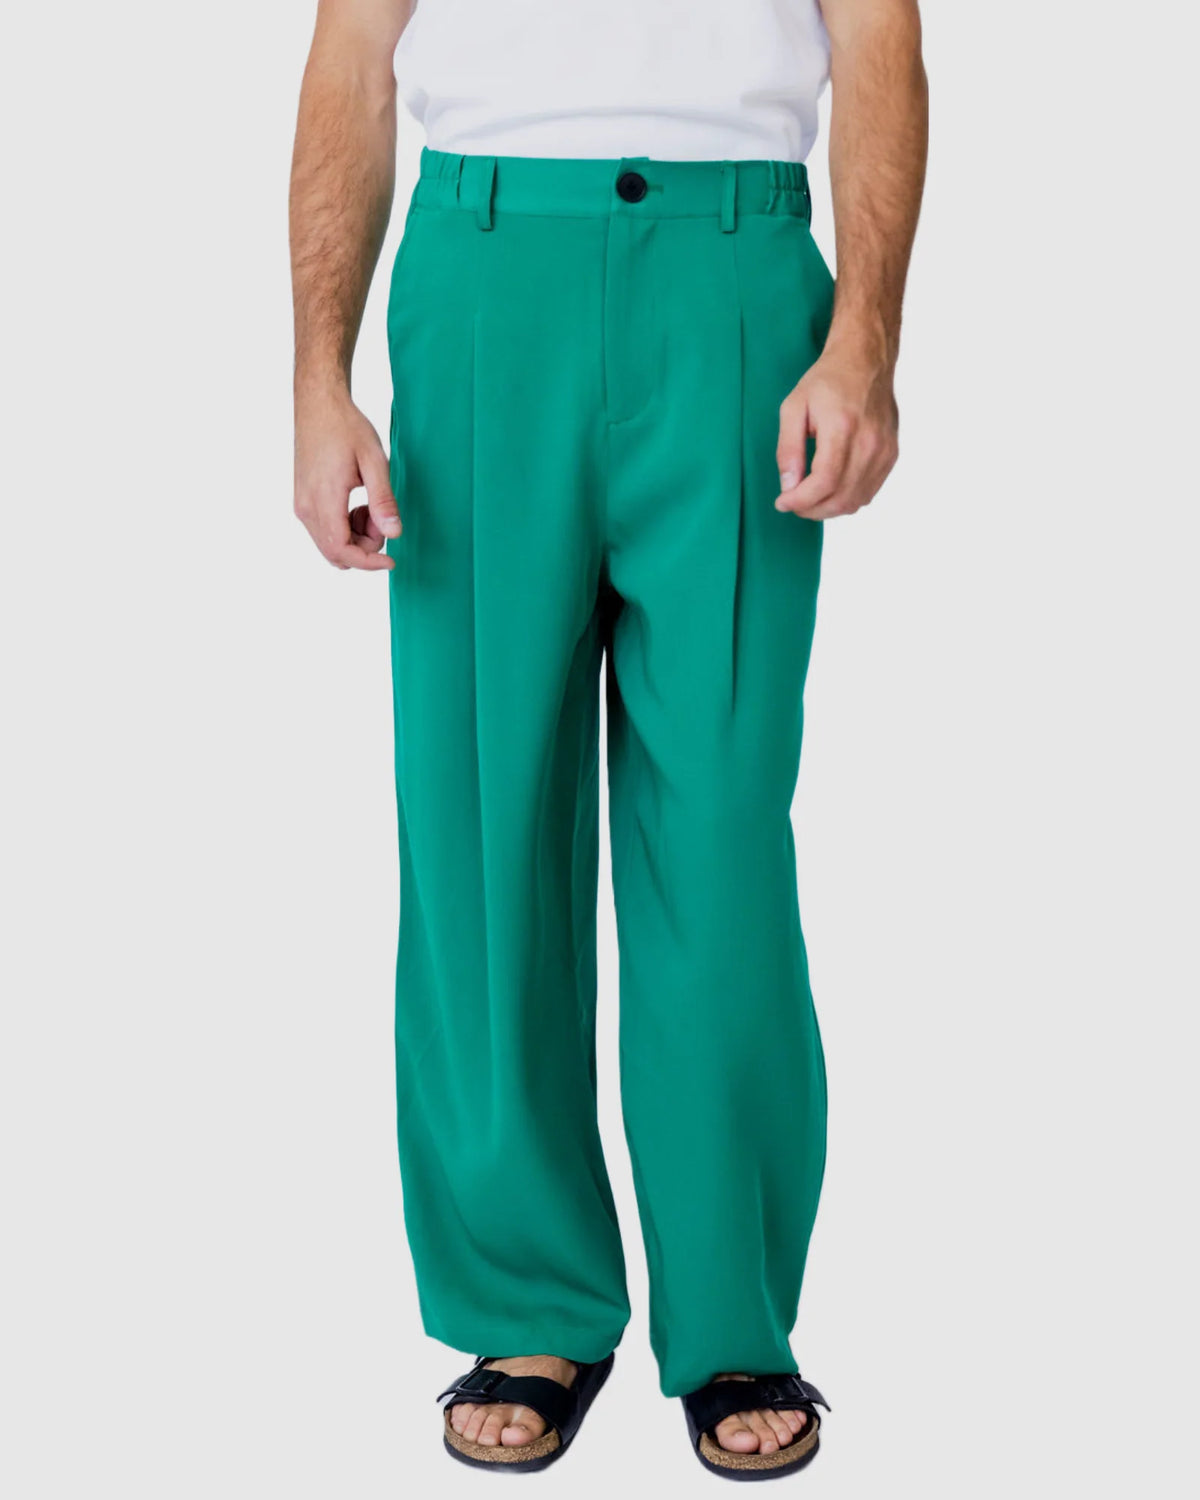 Justin Cassin Cyber Loose Leg Pants in Green Color